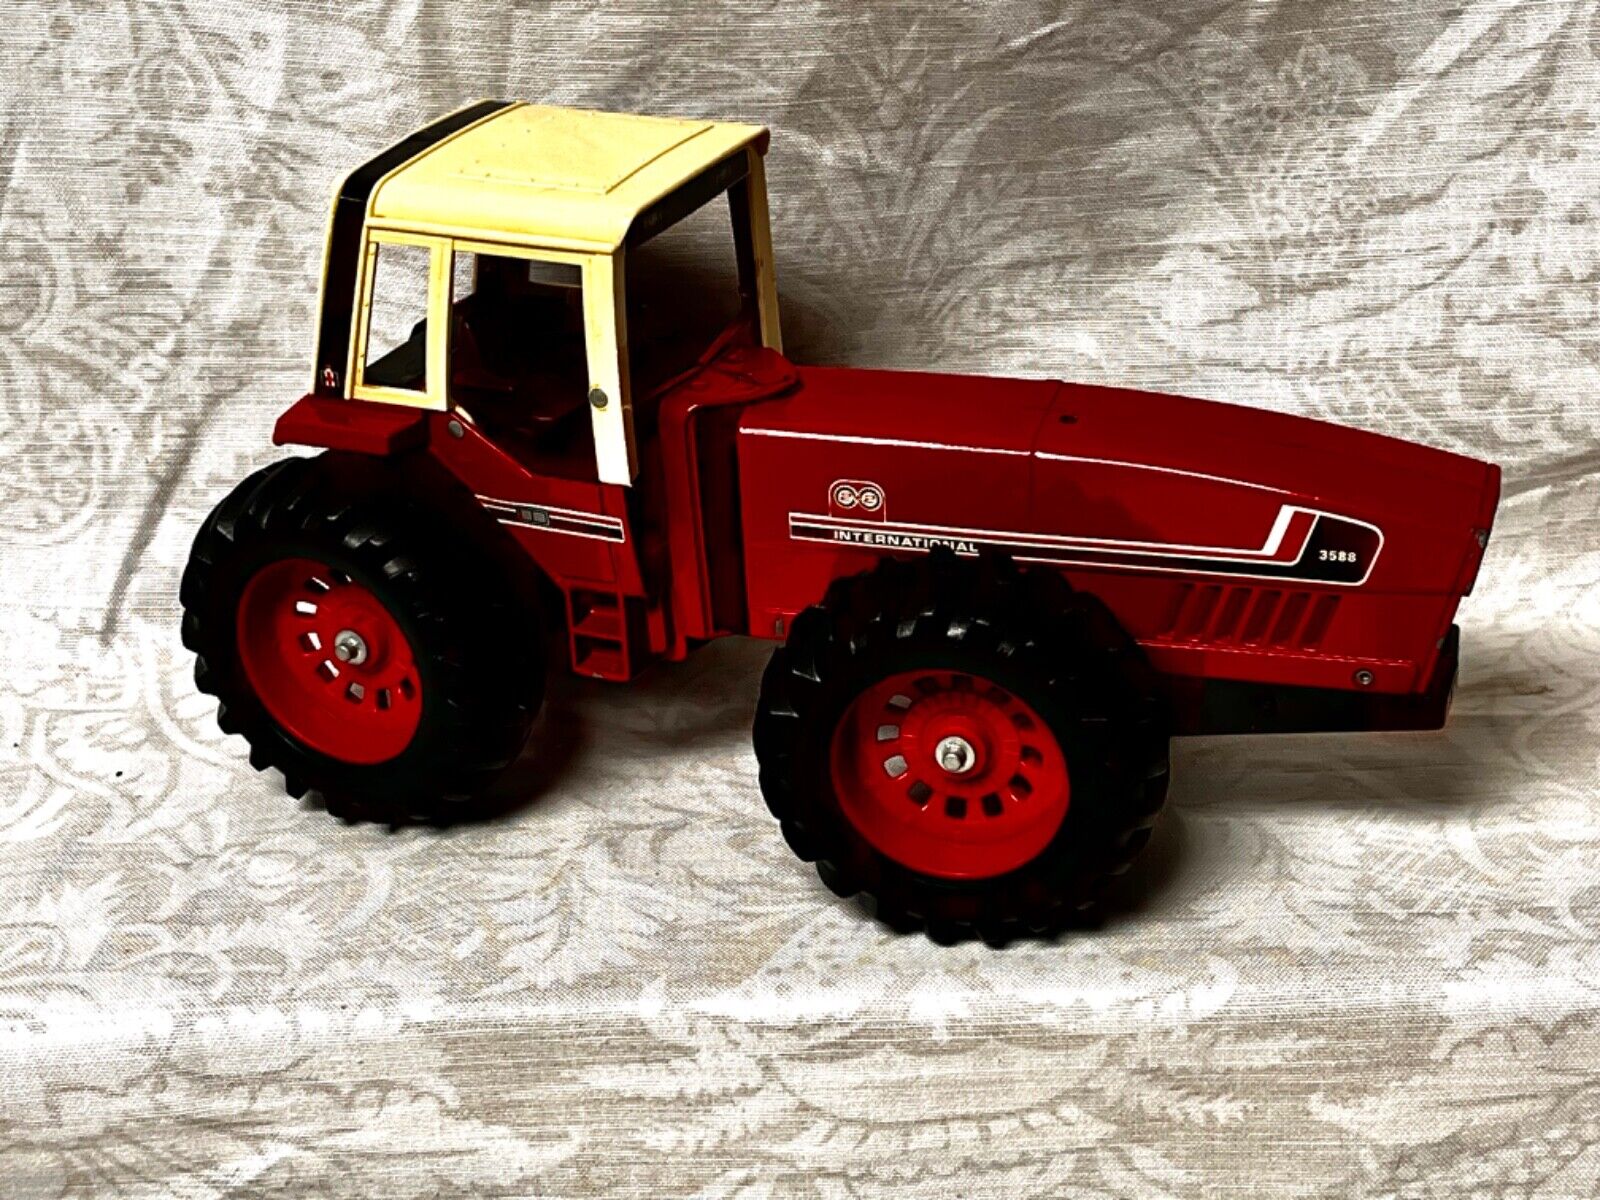 1/16 Scale ERTL International Harvester 3588 2+2 Tractor Collectors Toy